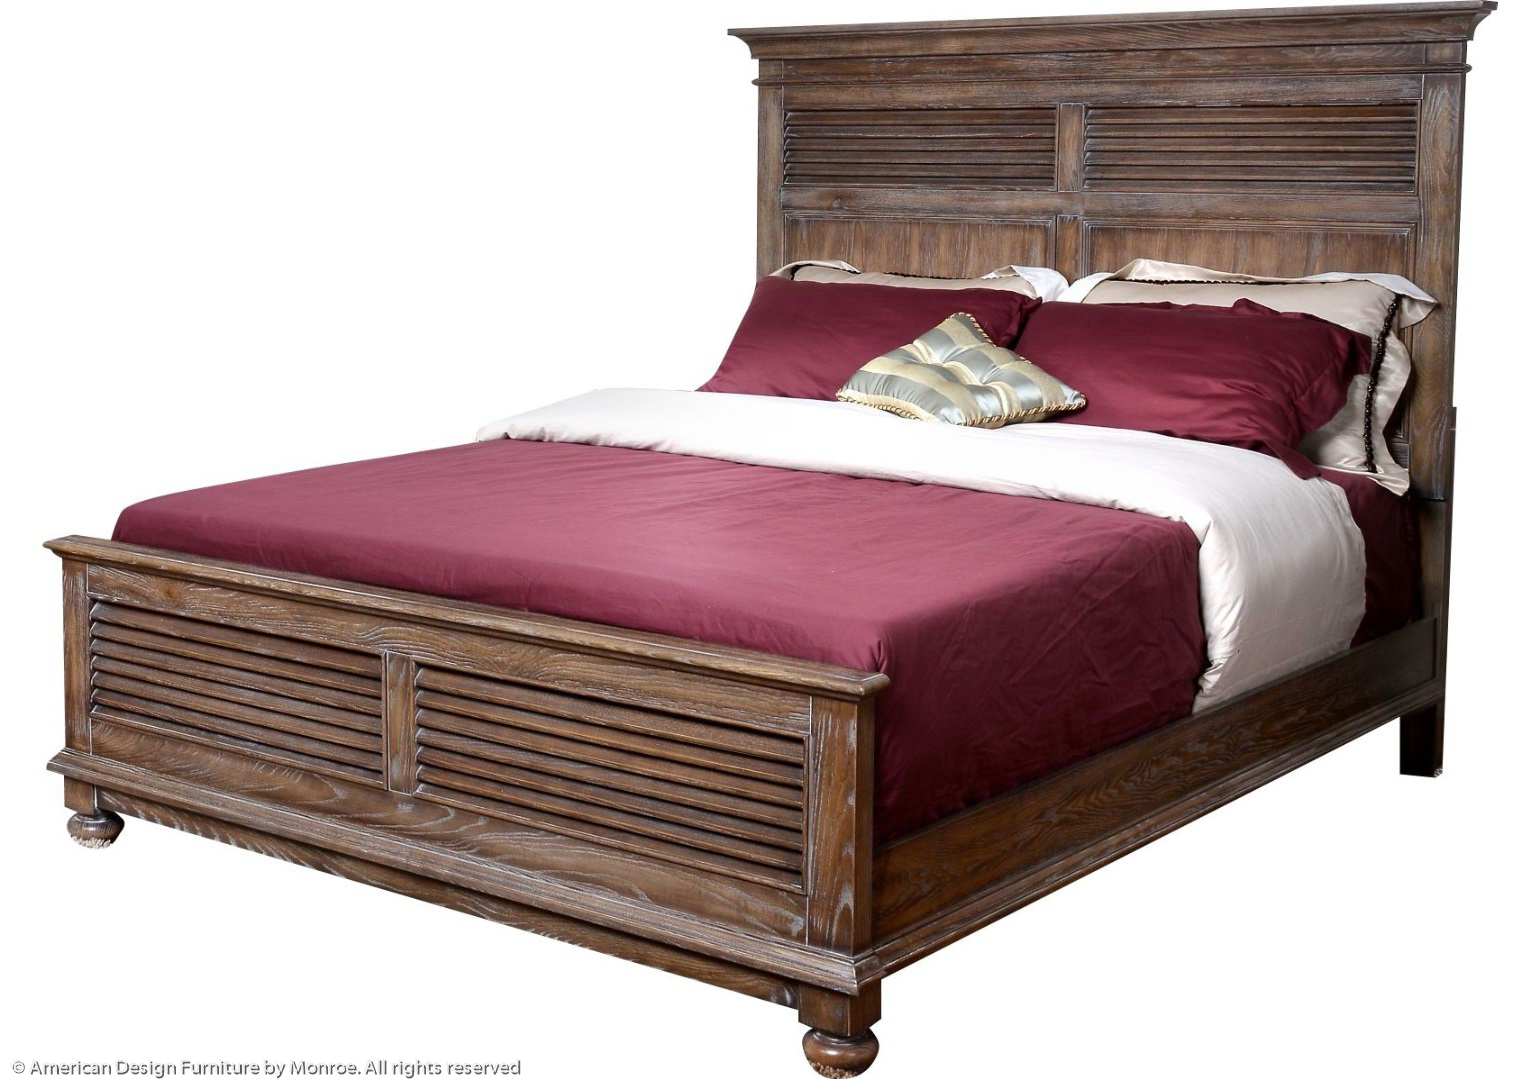 Bed Pic 2 (Kensington Bedroom Collection)